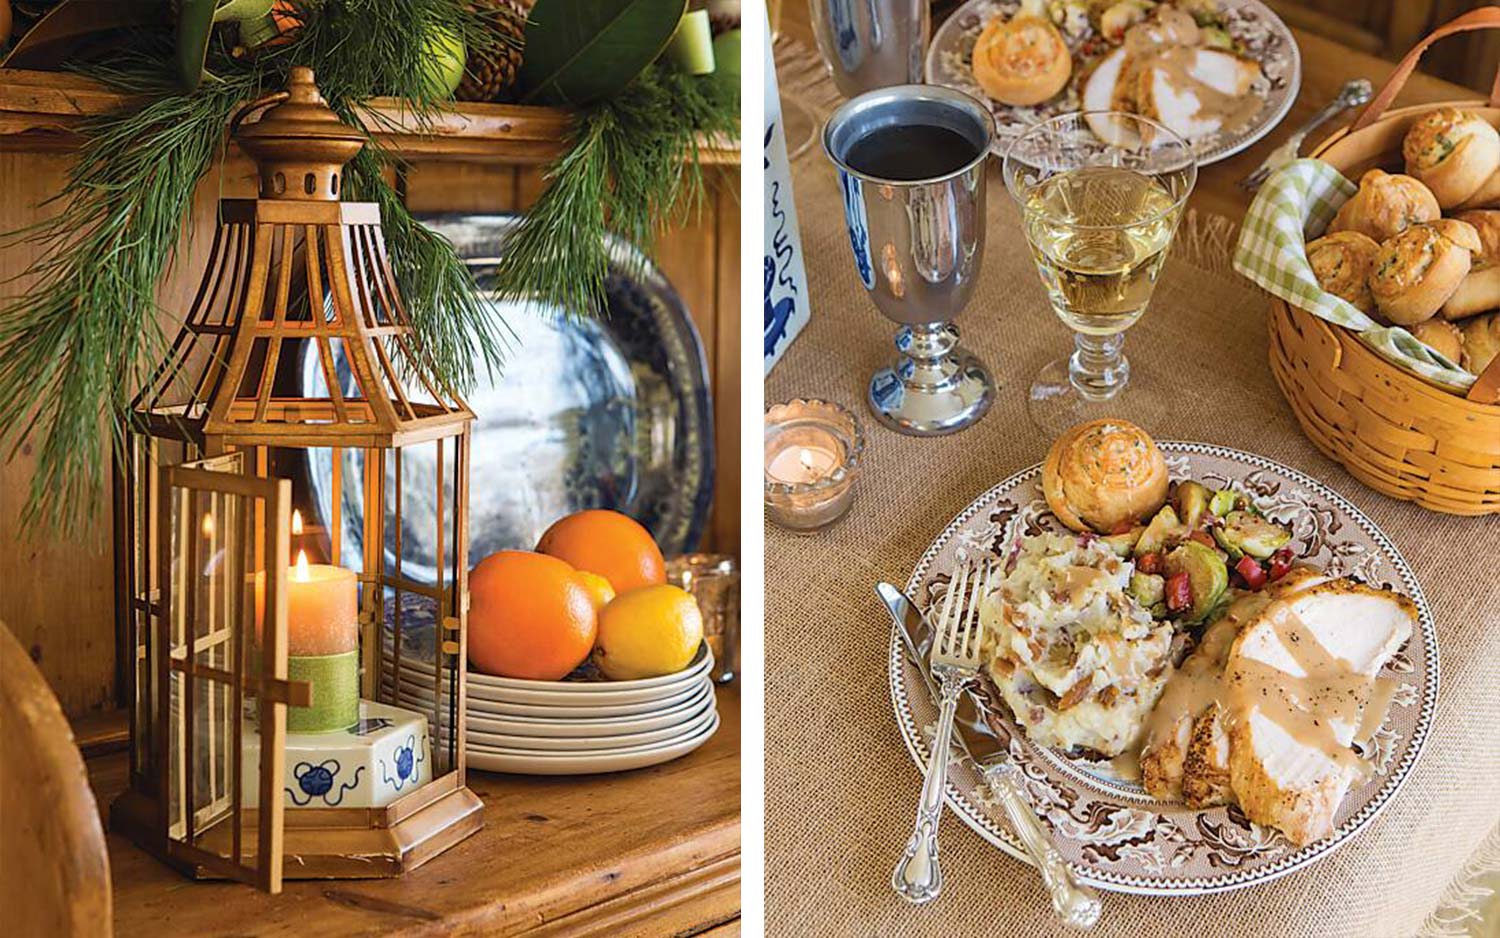 Celebrate Thanksgiving with the Season’s Harvest